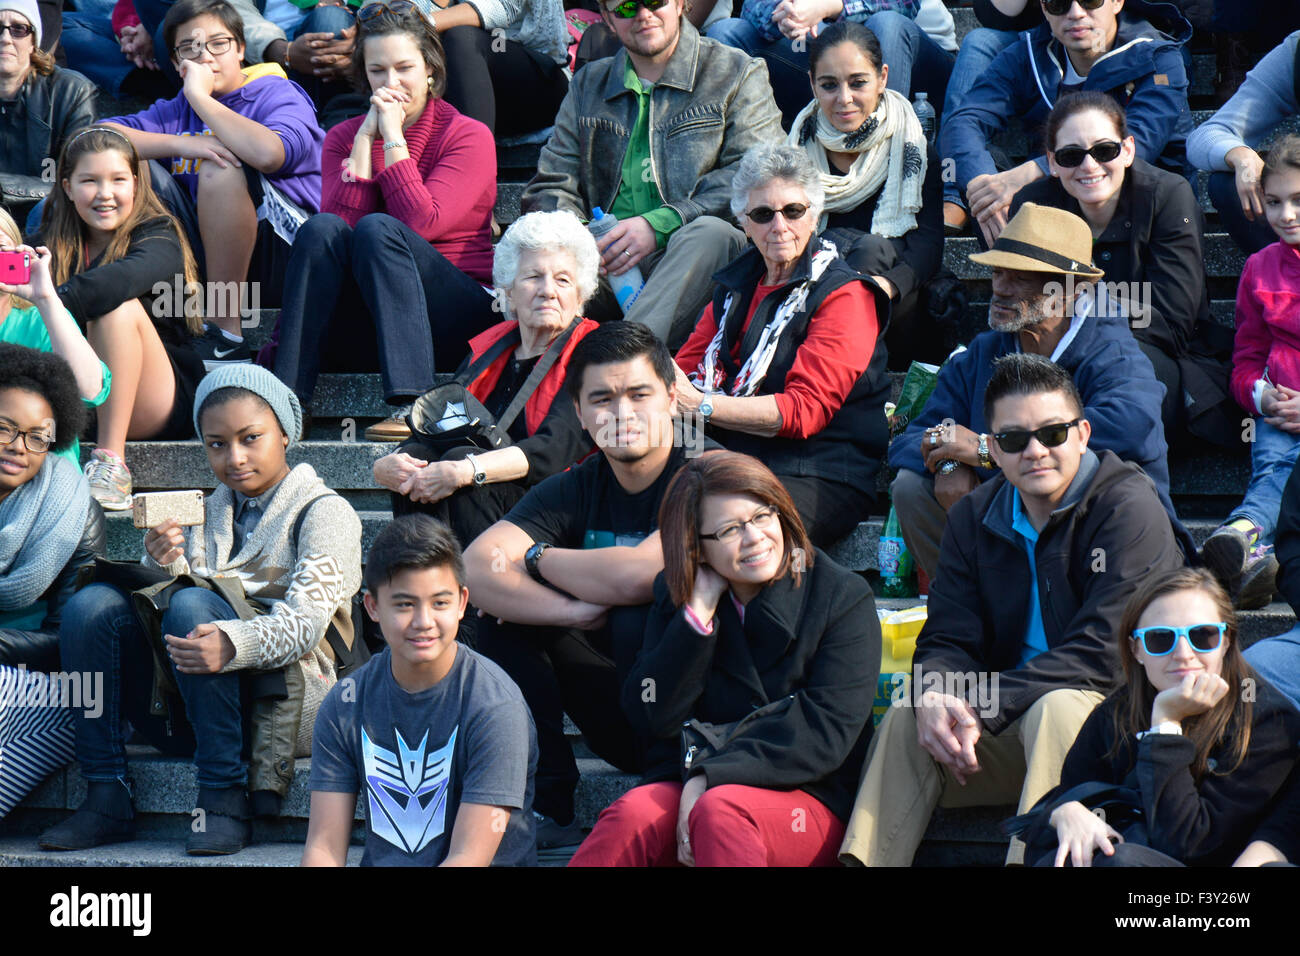 Large group of diverse people in the USA sitting on bleachers reacting and watching a street performance event Stock Photo